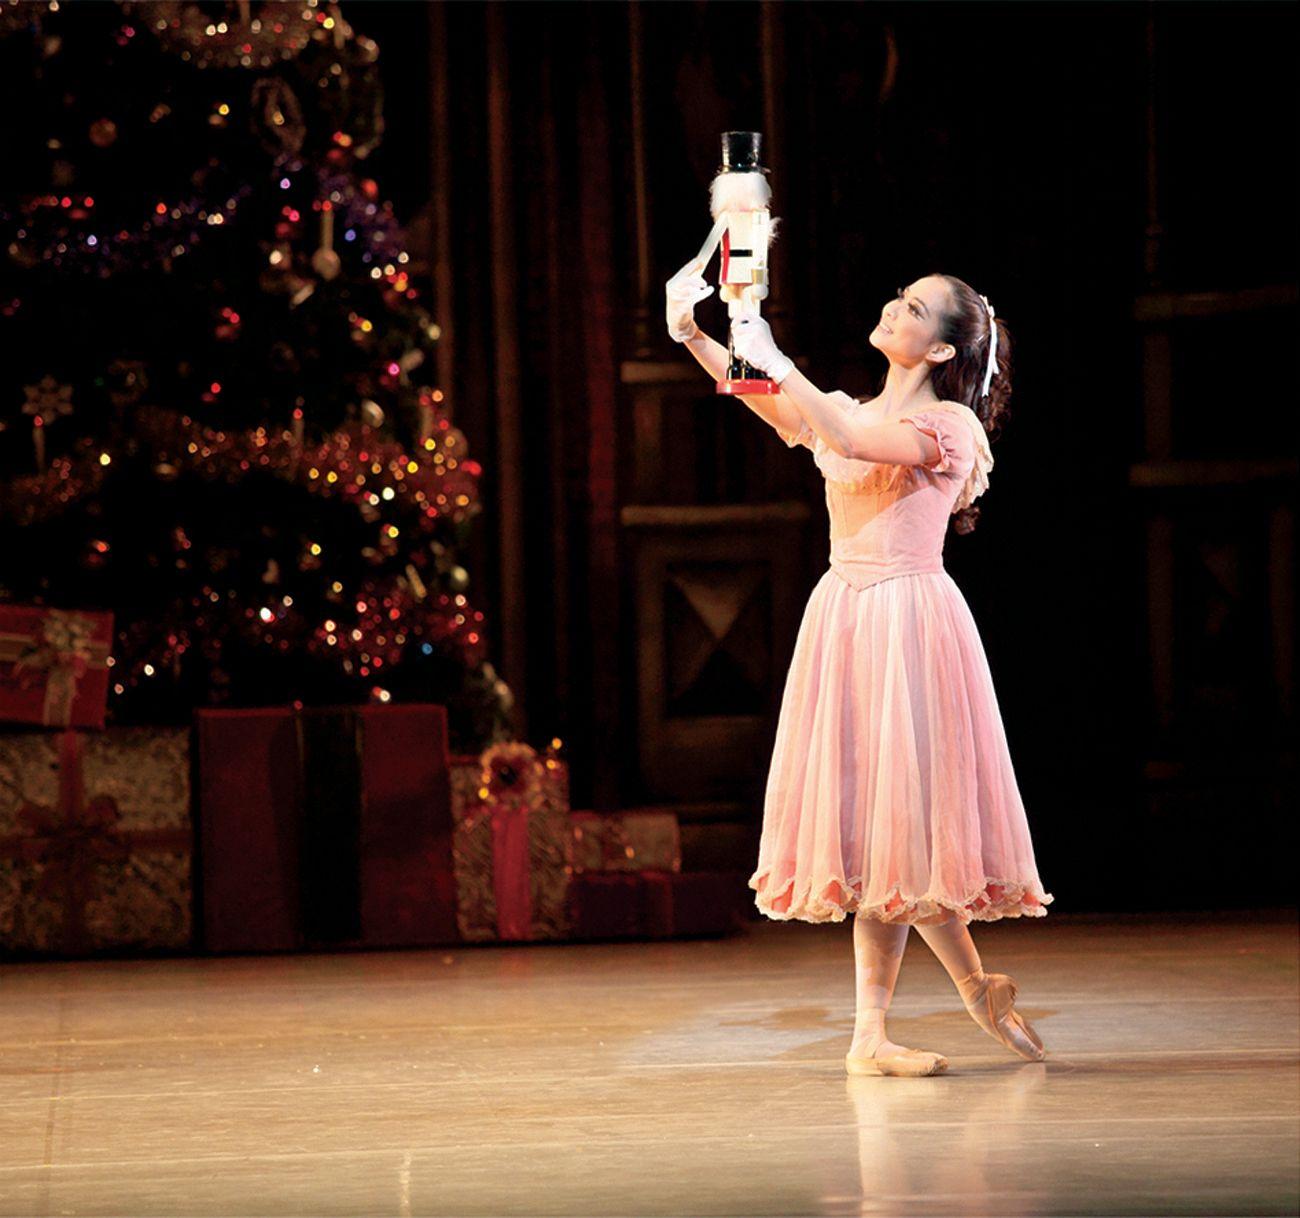 The Nutcracker. The Christmas season is not complete if I don't